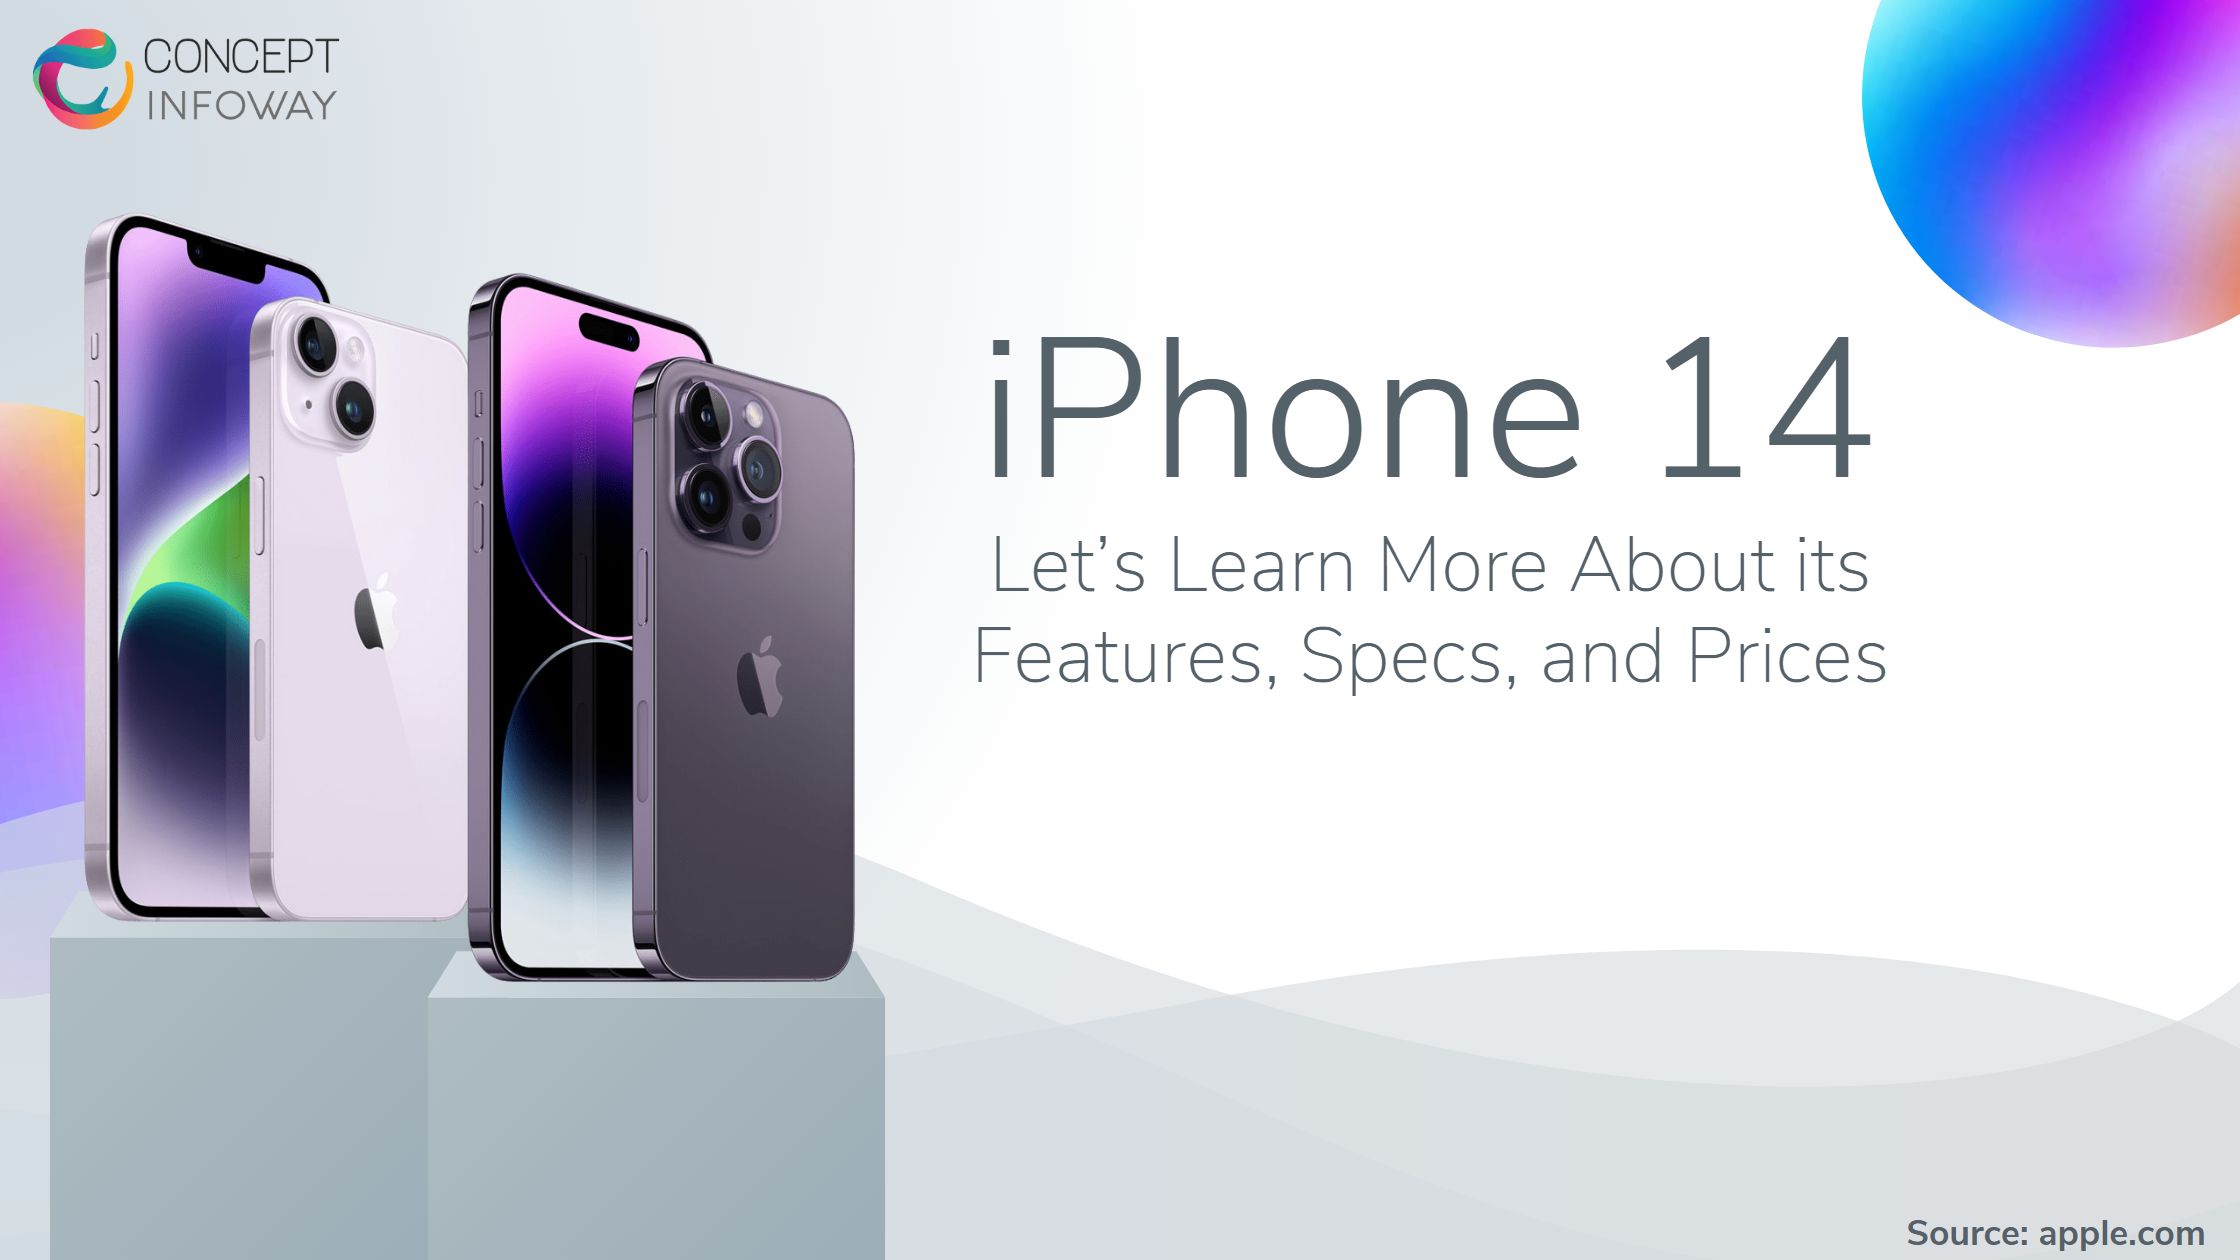 iPhone 14 and iPhone 14 Pro - Features, Specs, and Prices